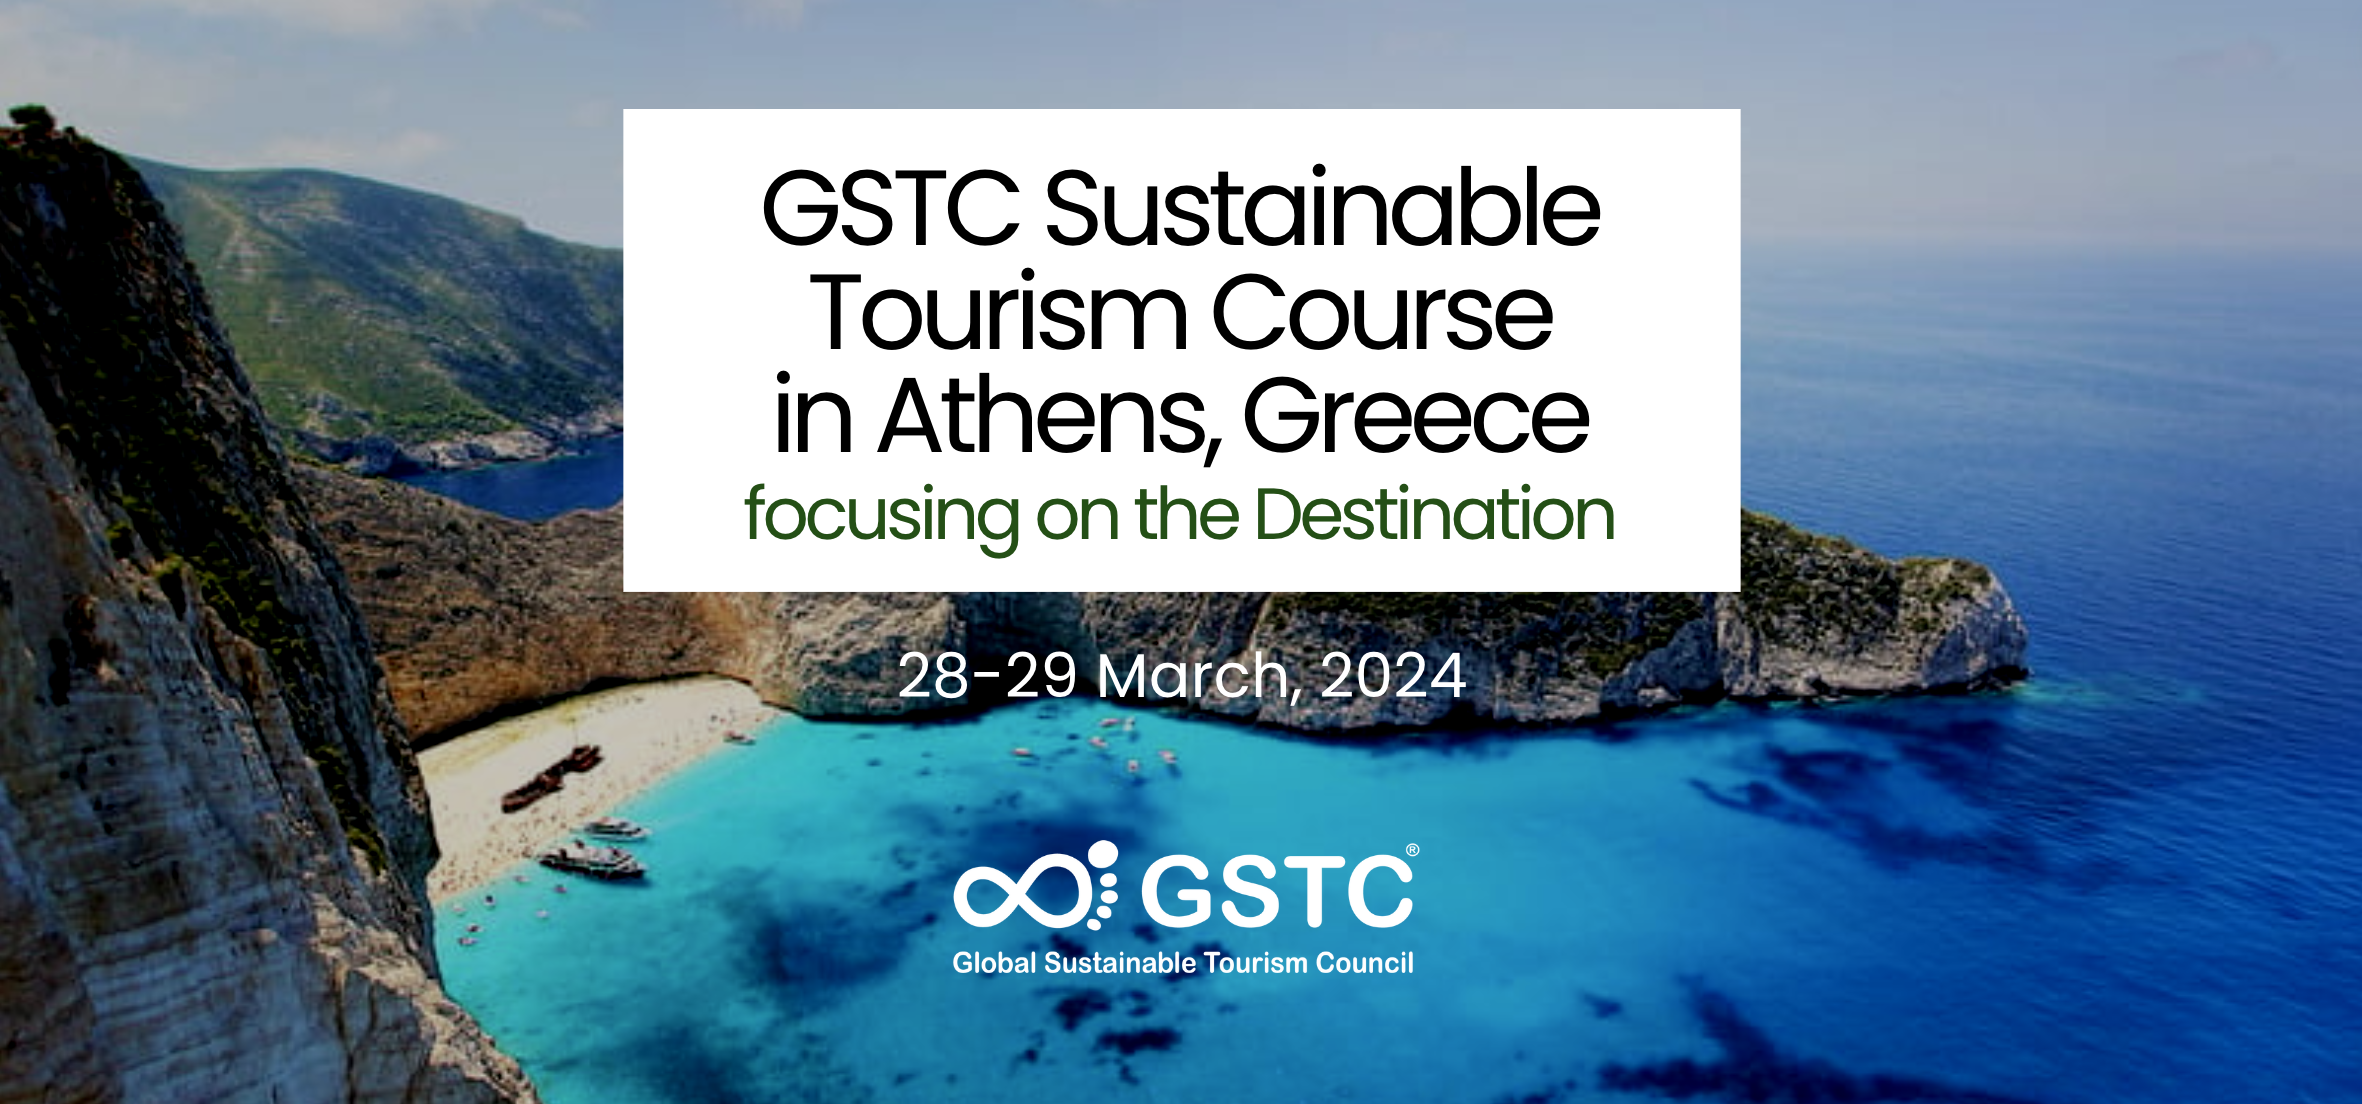 GSTC Sustainable Tourism Course focusing on the Destination